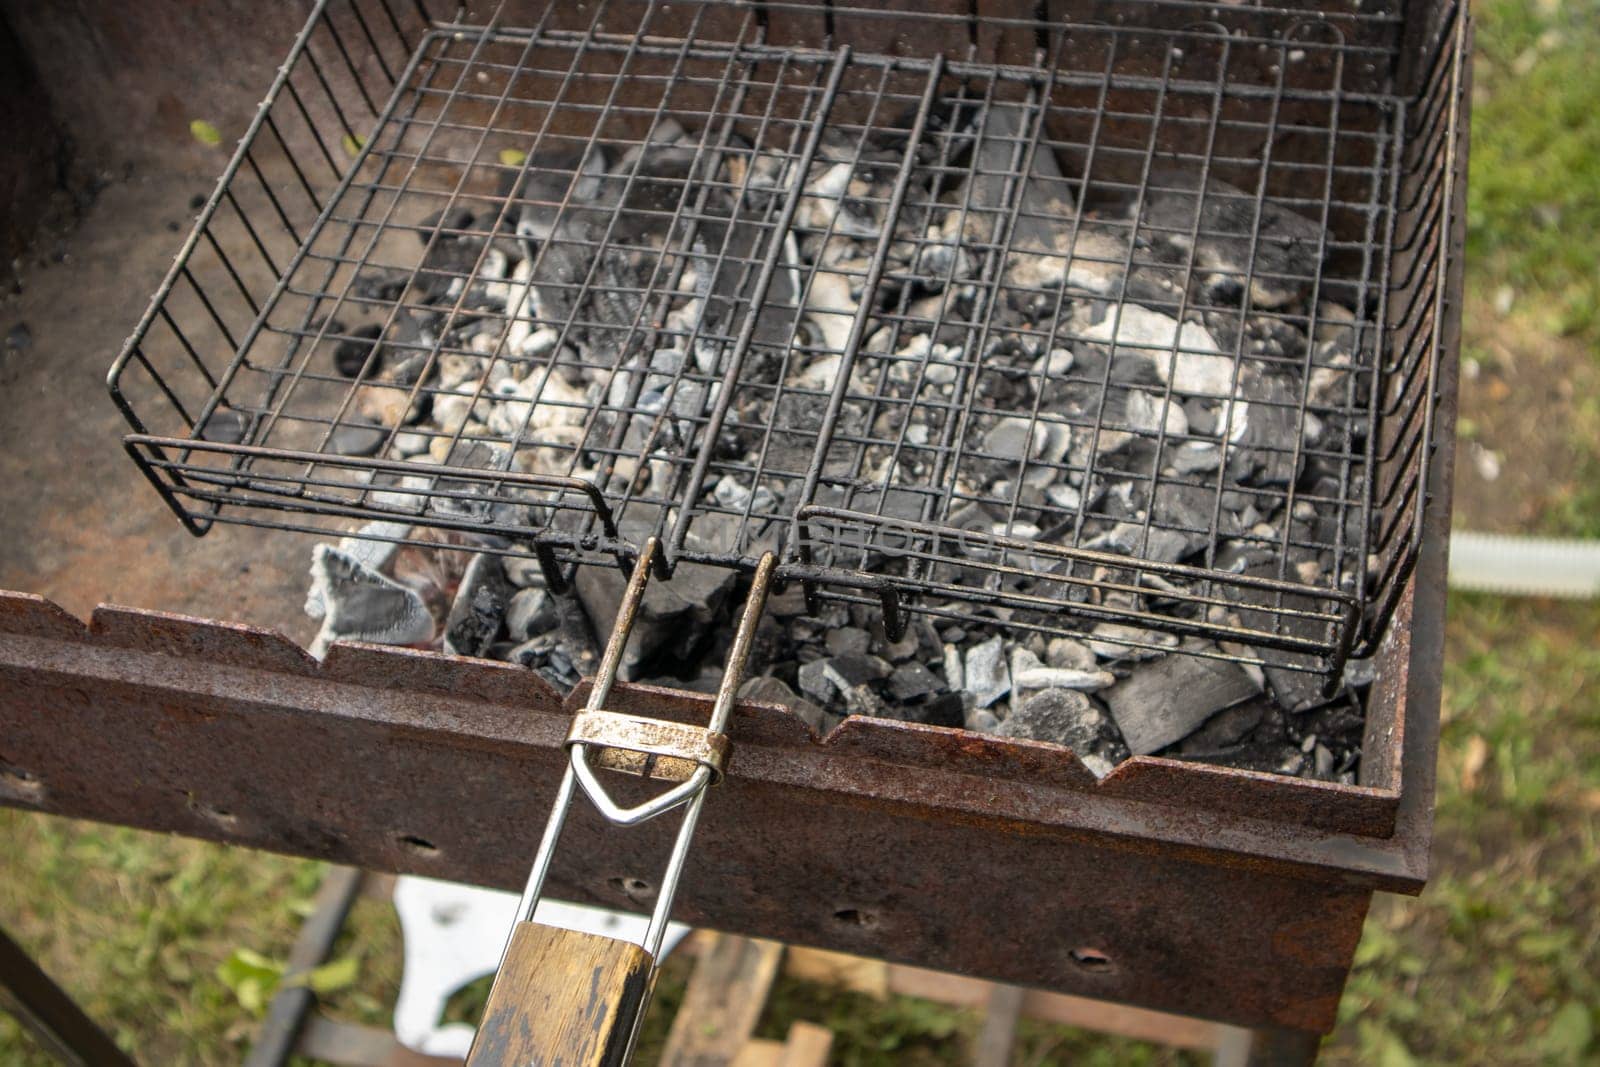 Close-up of a barbecue grill with burnt coals without fire, after cooking.